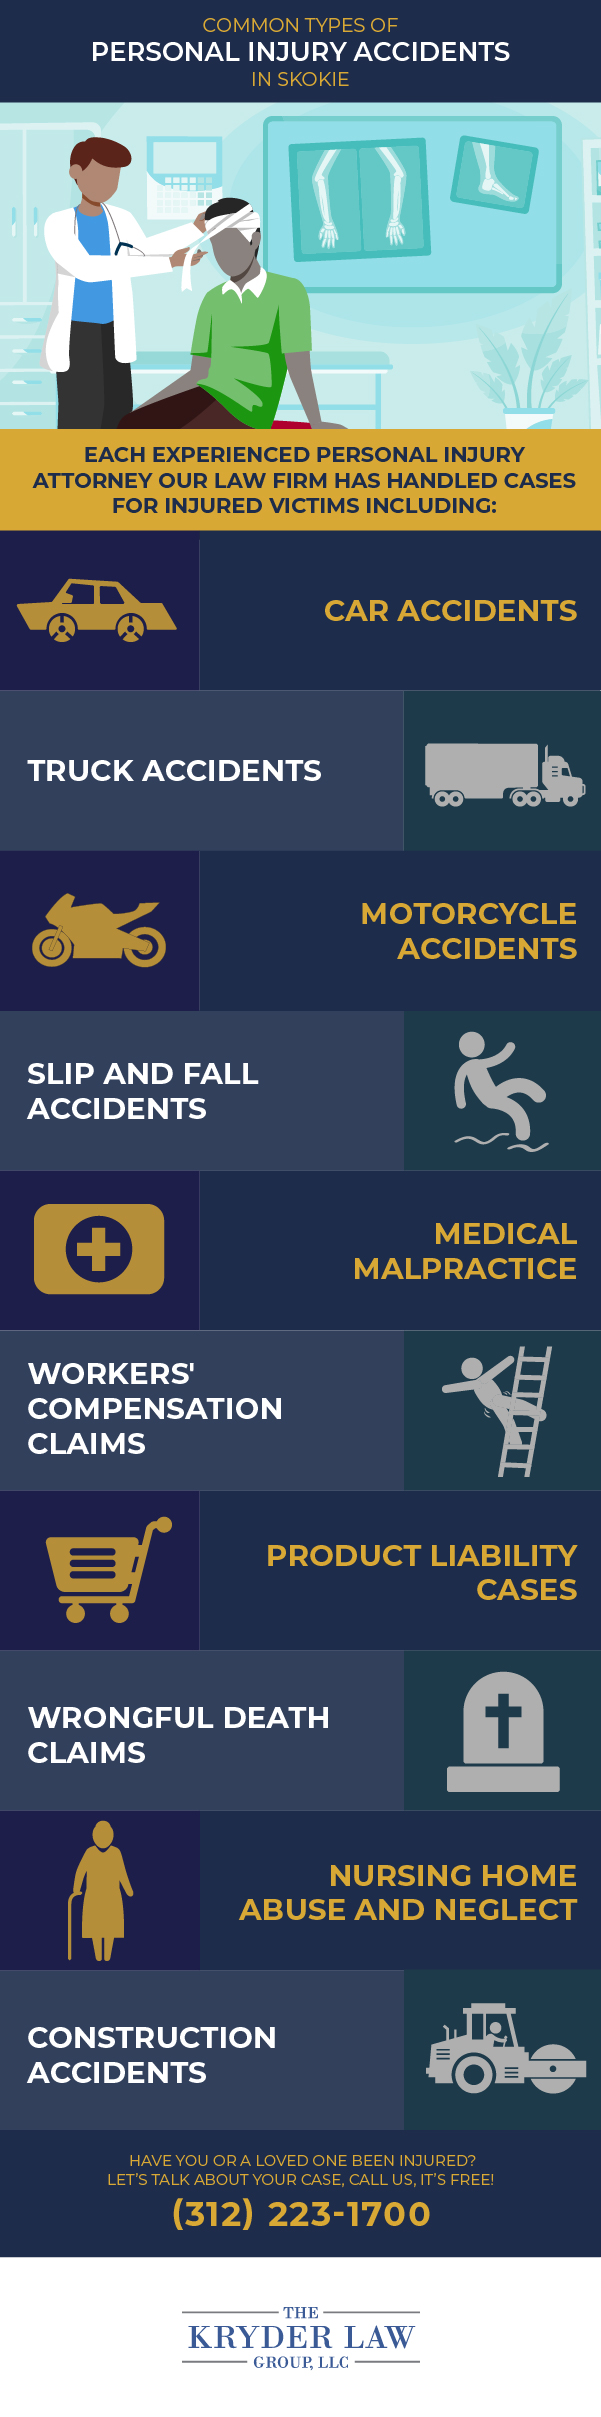 Common Types of Personal Injury Accidents in Skokie